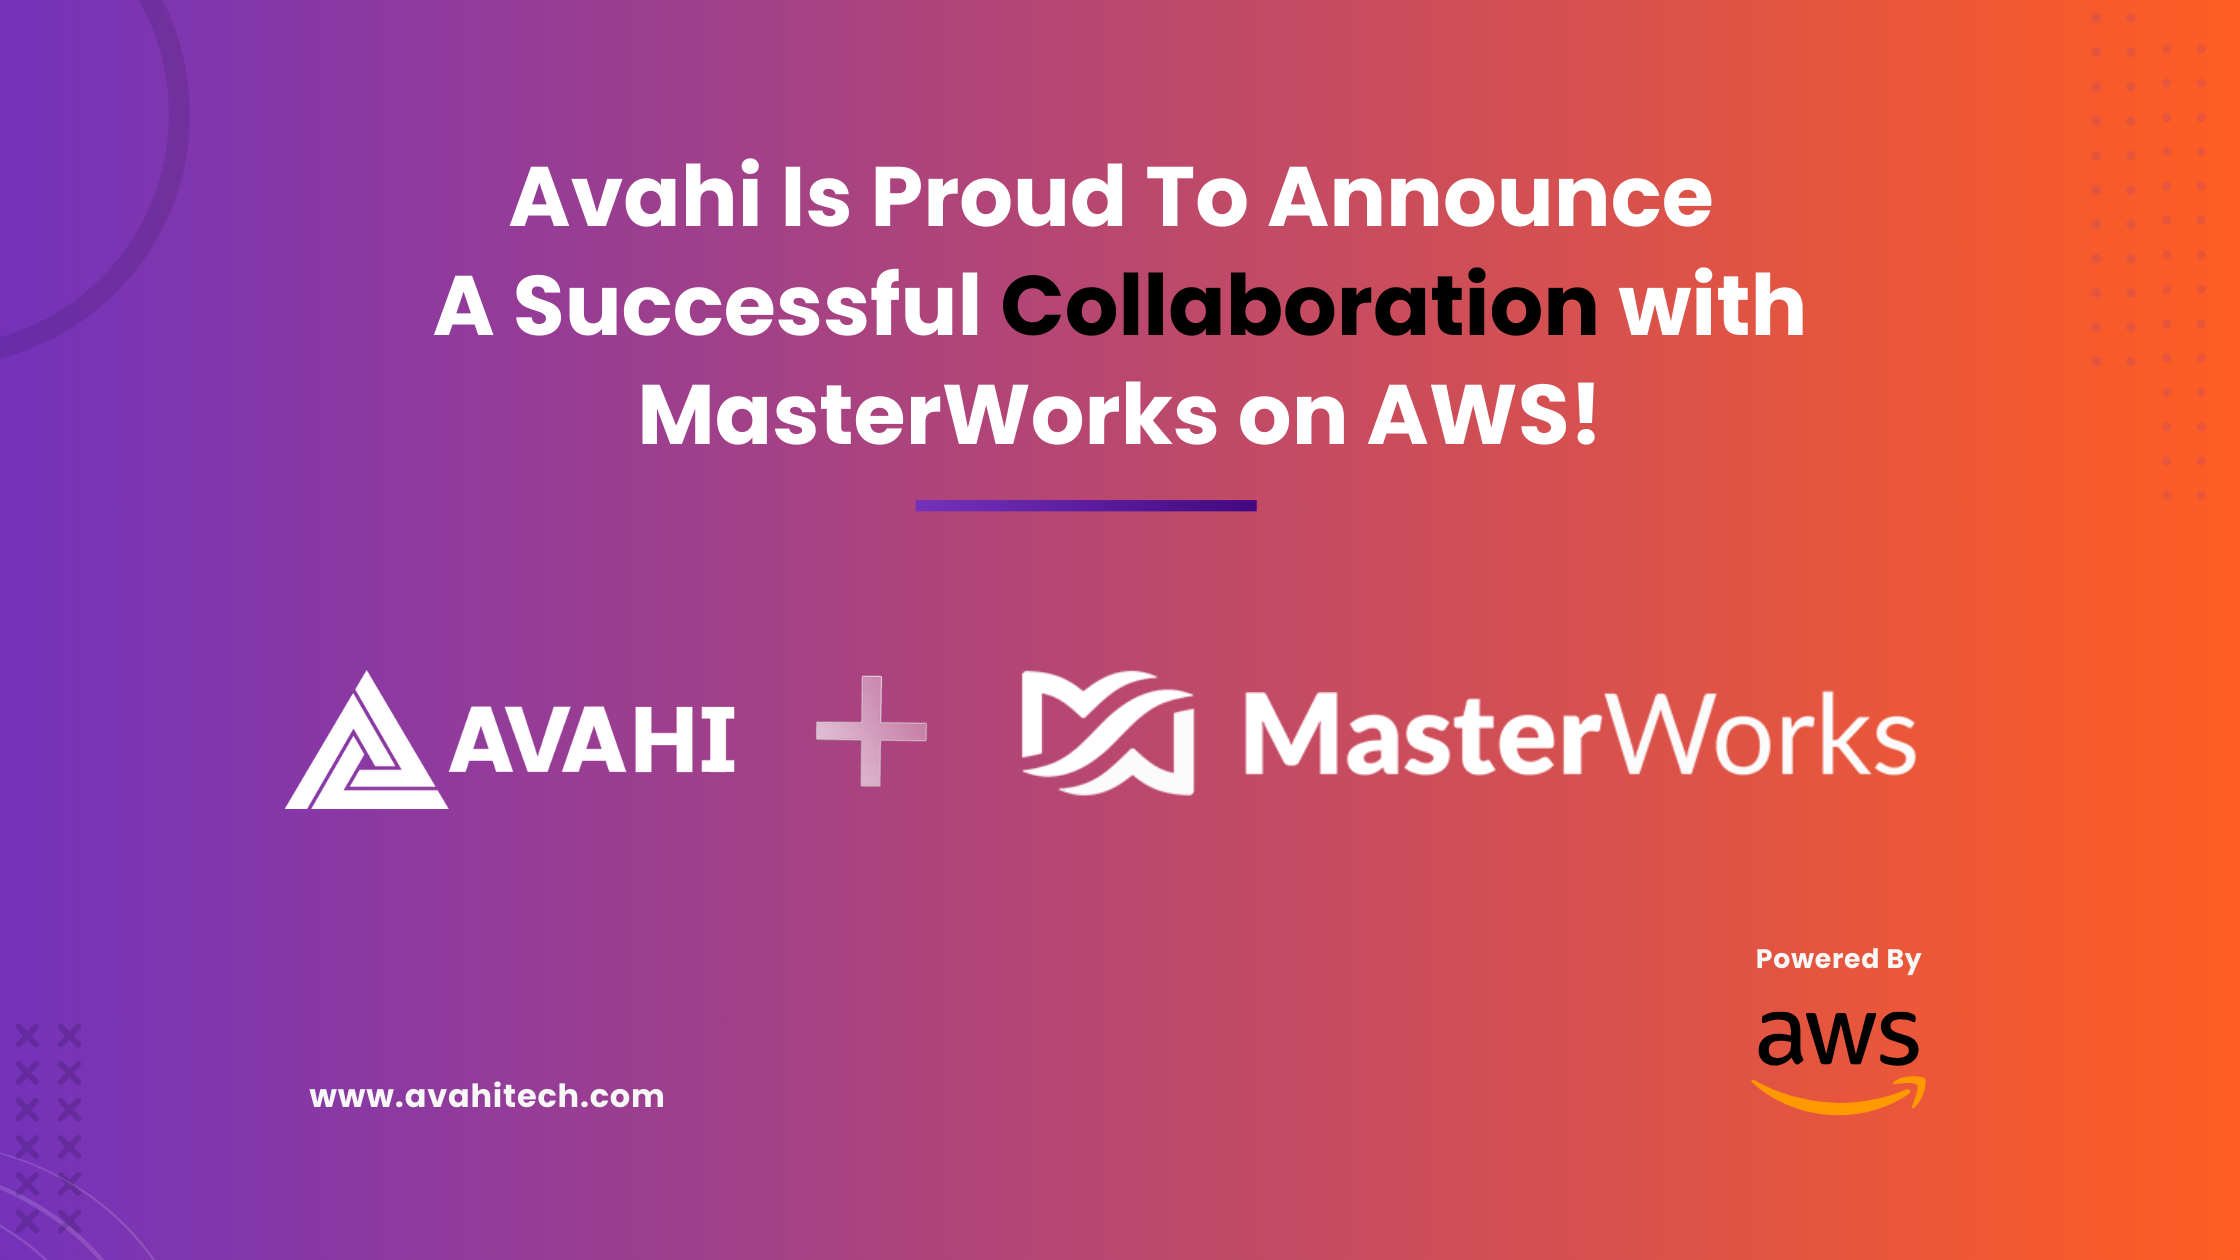 Avahi Is Proud To Announce A Successful Collaboration with MasterWorks on AWS!